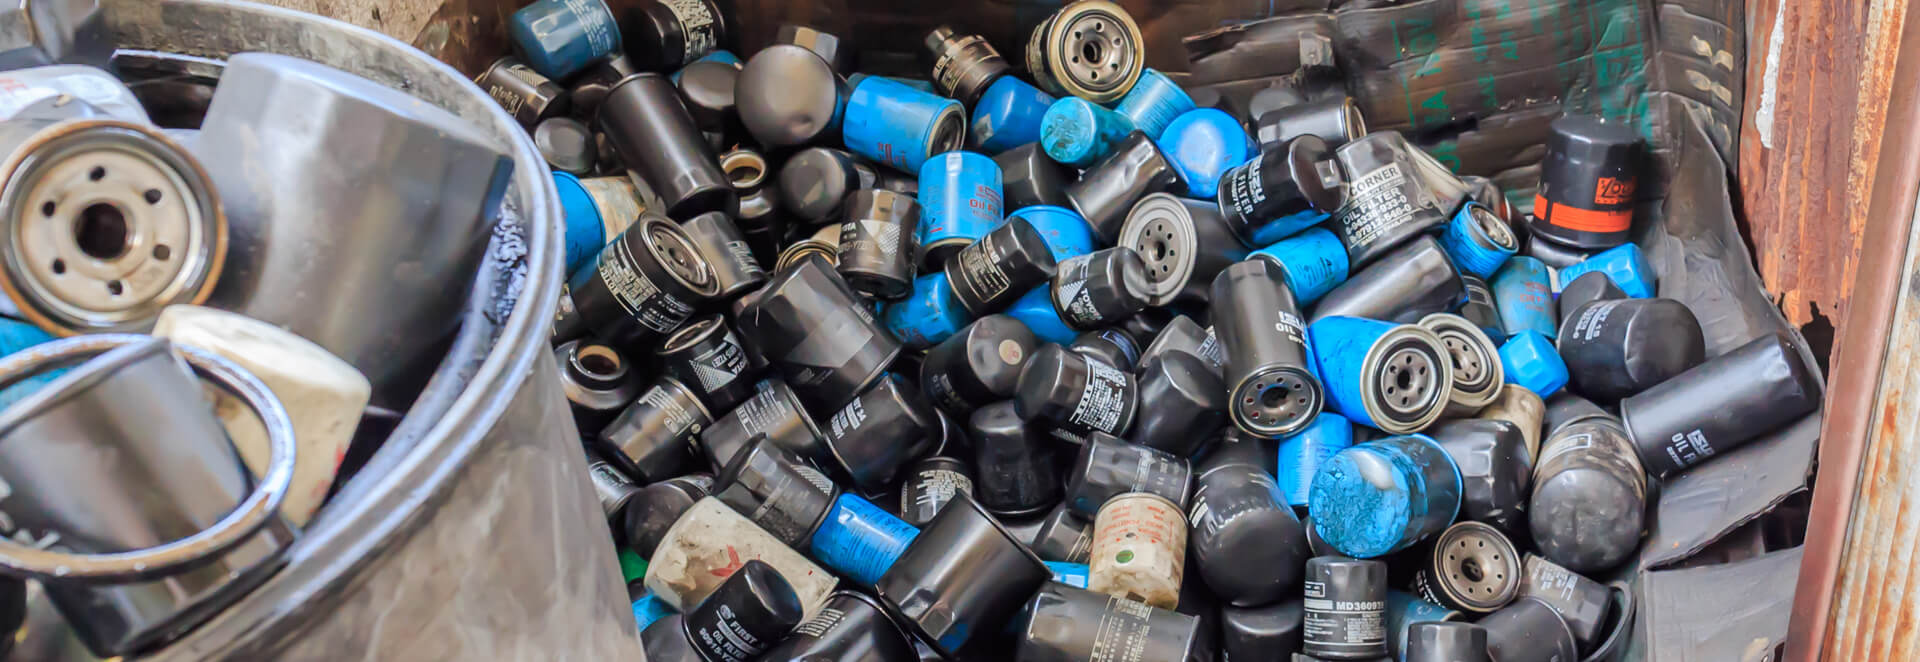 processing and recycling of oil filters